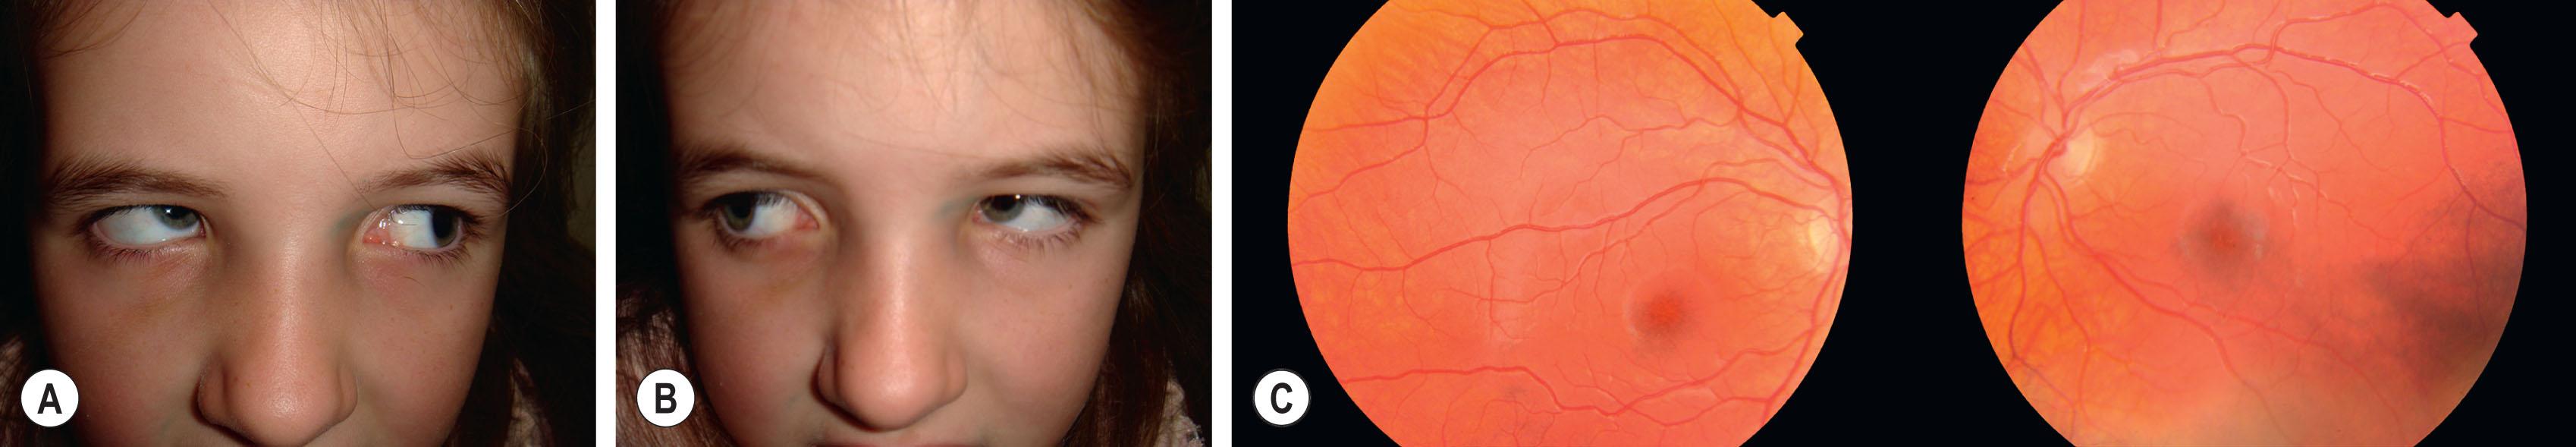 Fig. 77.6, Right IOOA (A), left IOOA (B), and fundus excyclotorsion (C) in the same patient. Note the fovea lies below a line passing through the inferior edge of the optic discs.